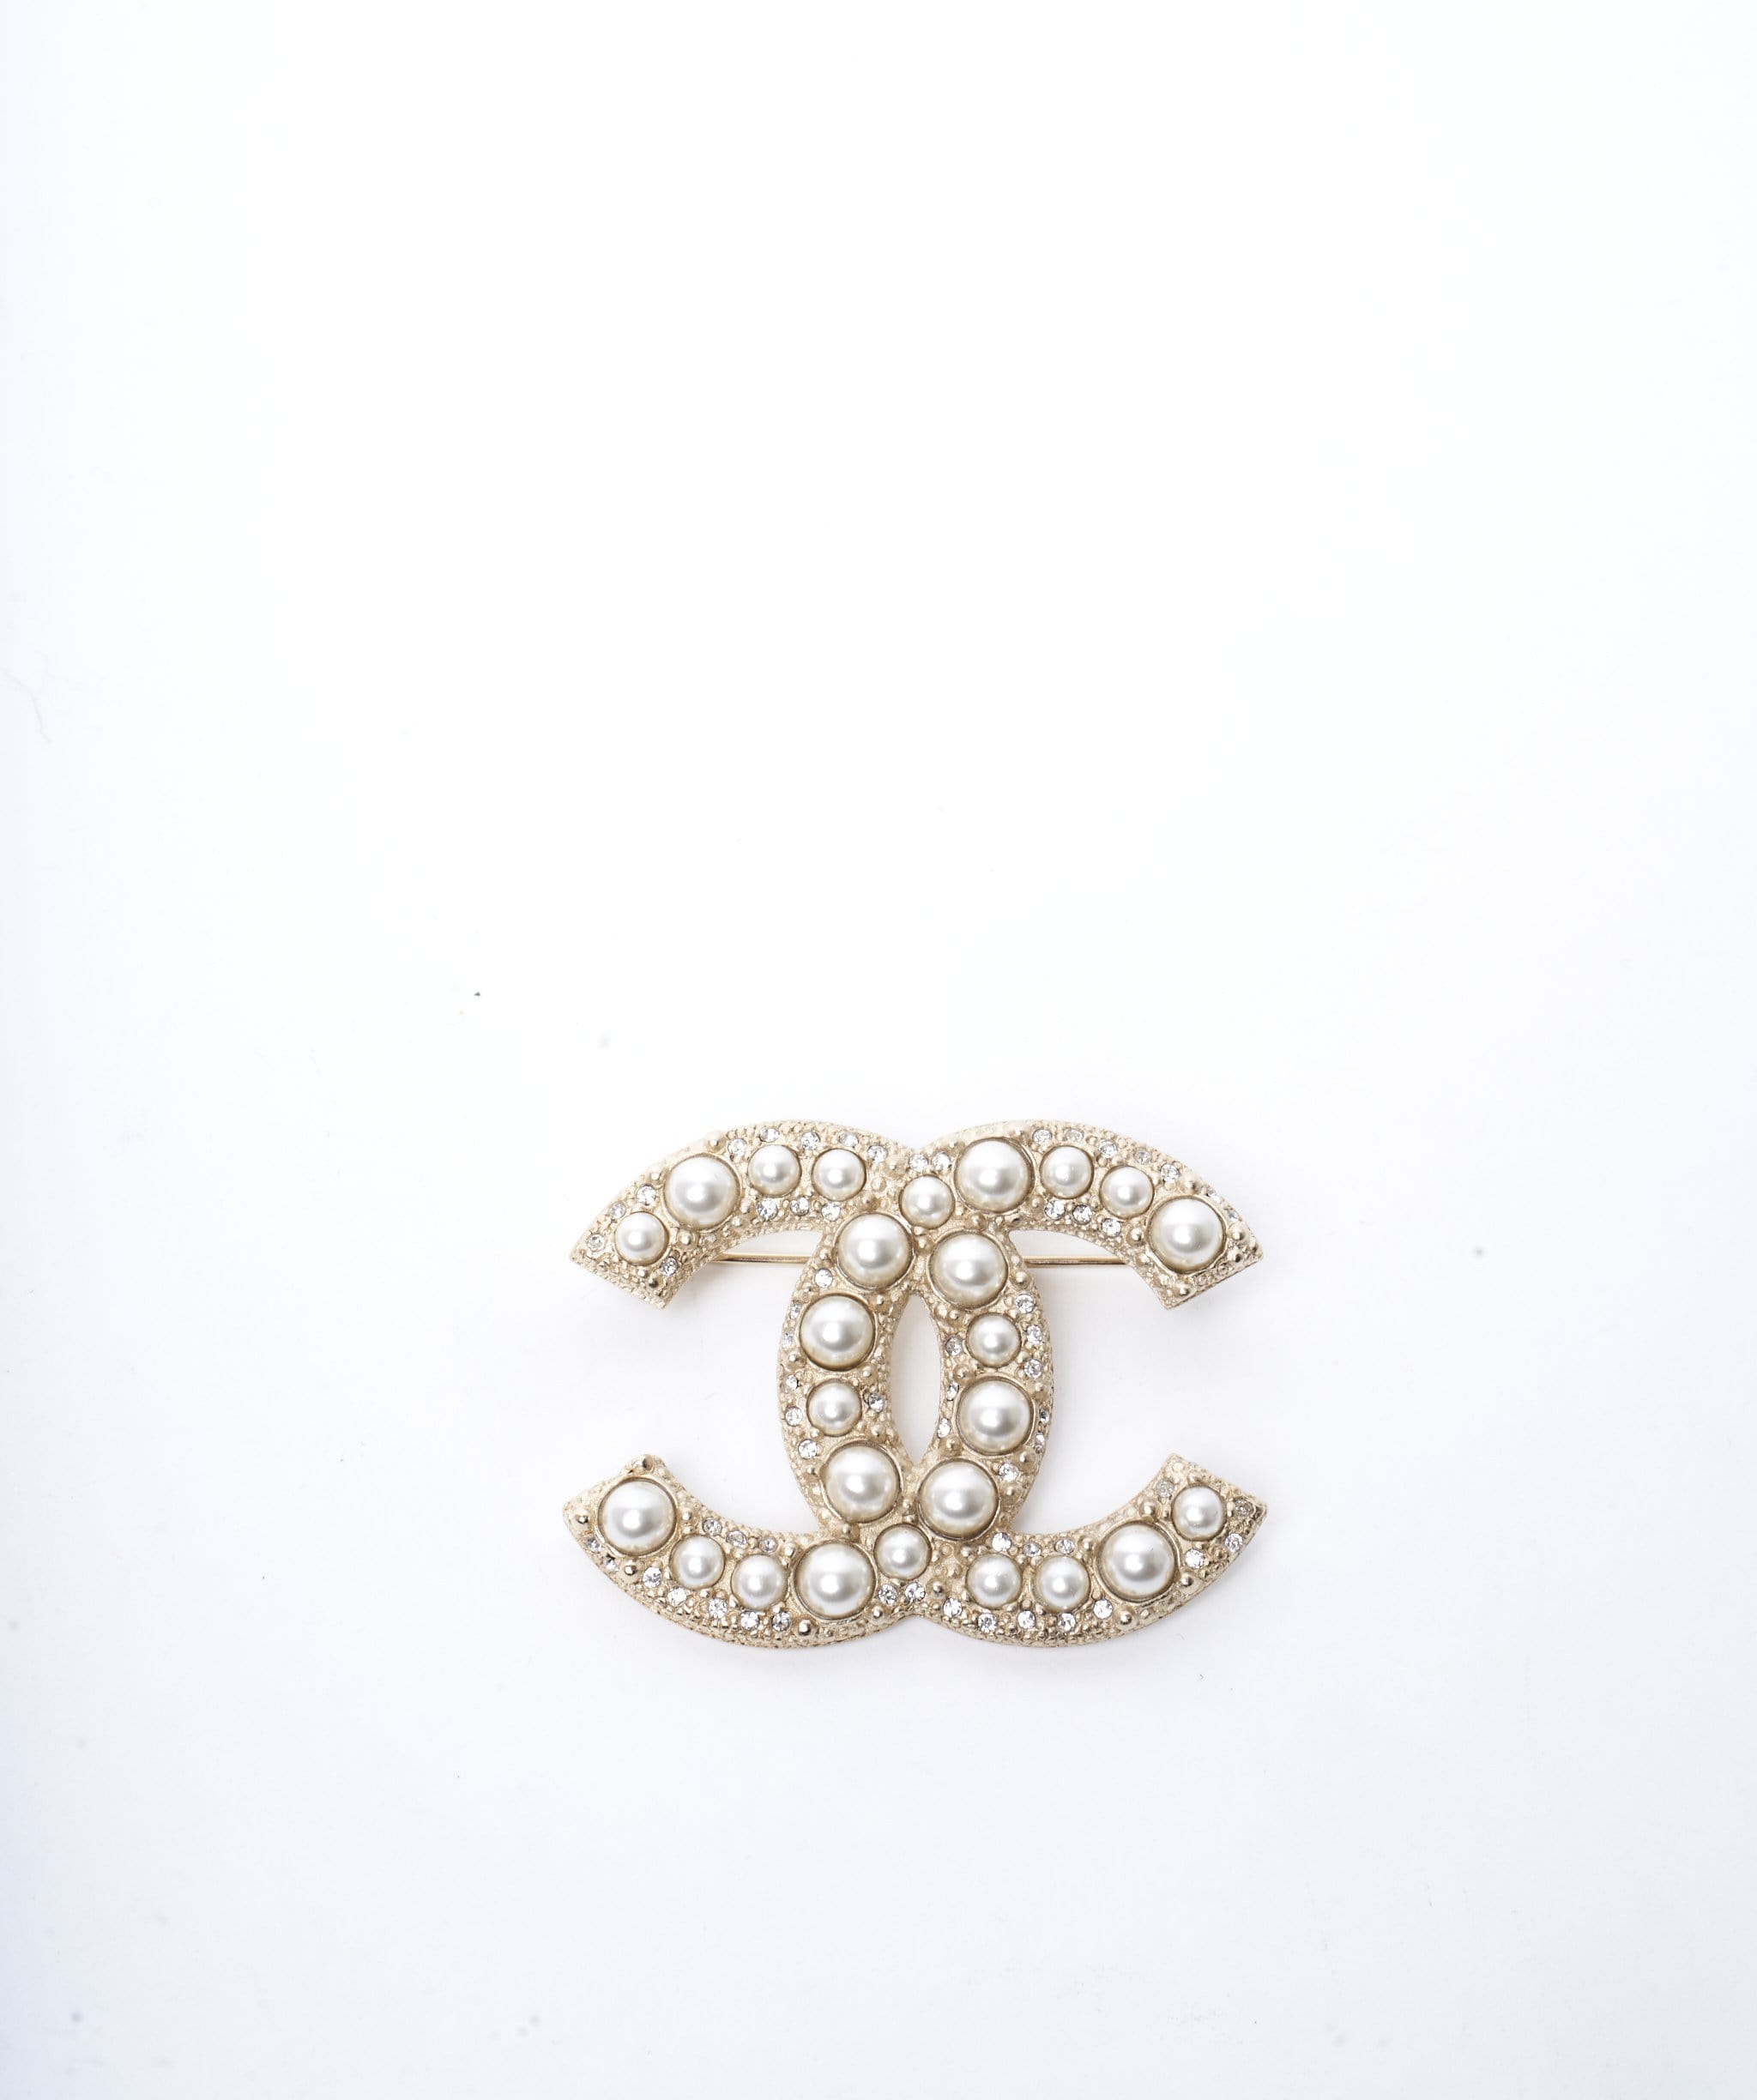 Chanel CC pearl and gold encrusted brooch